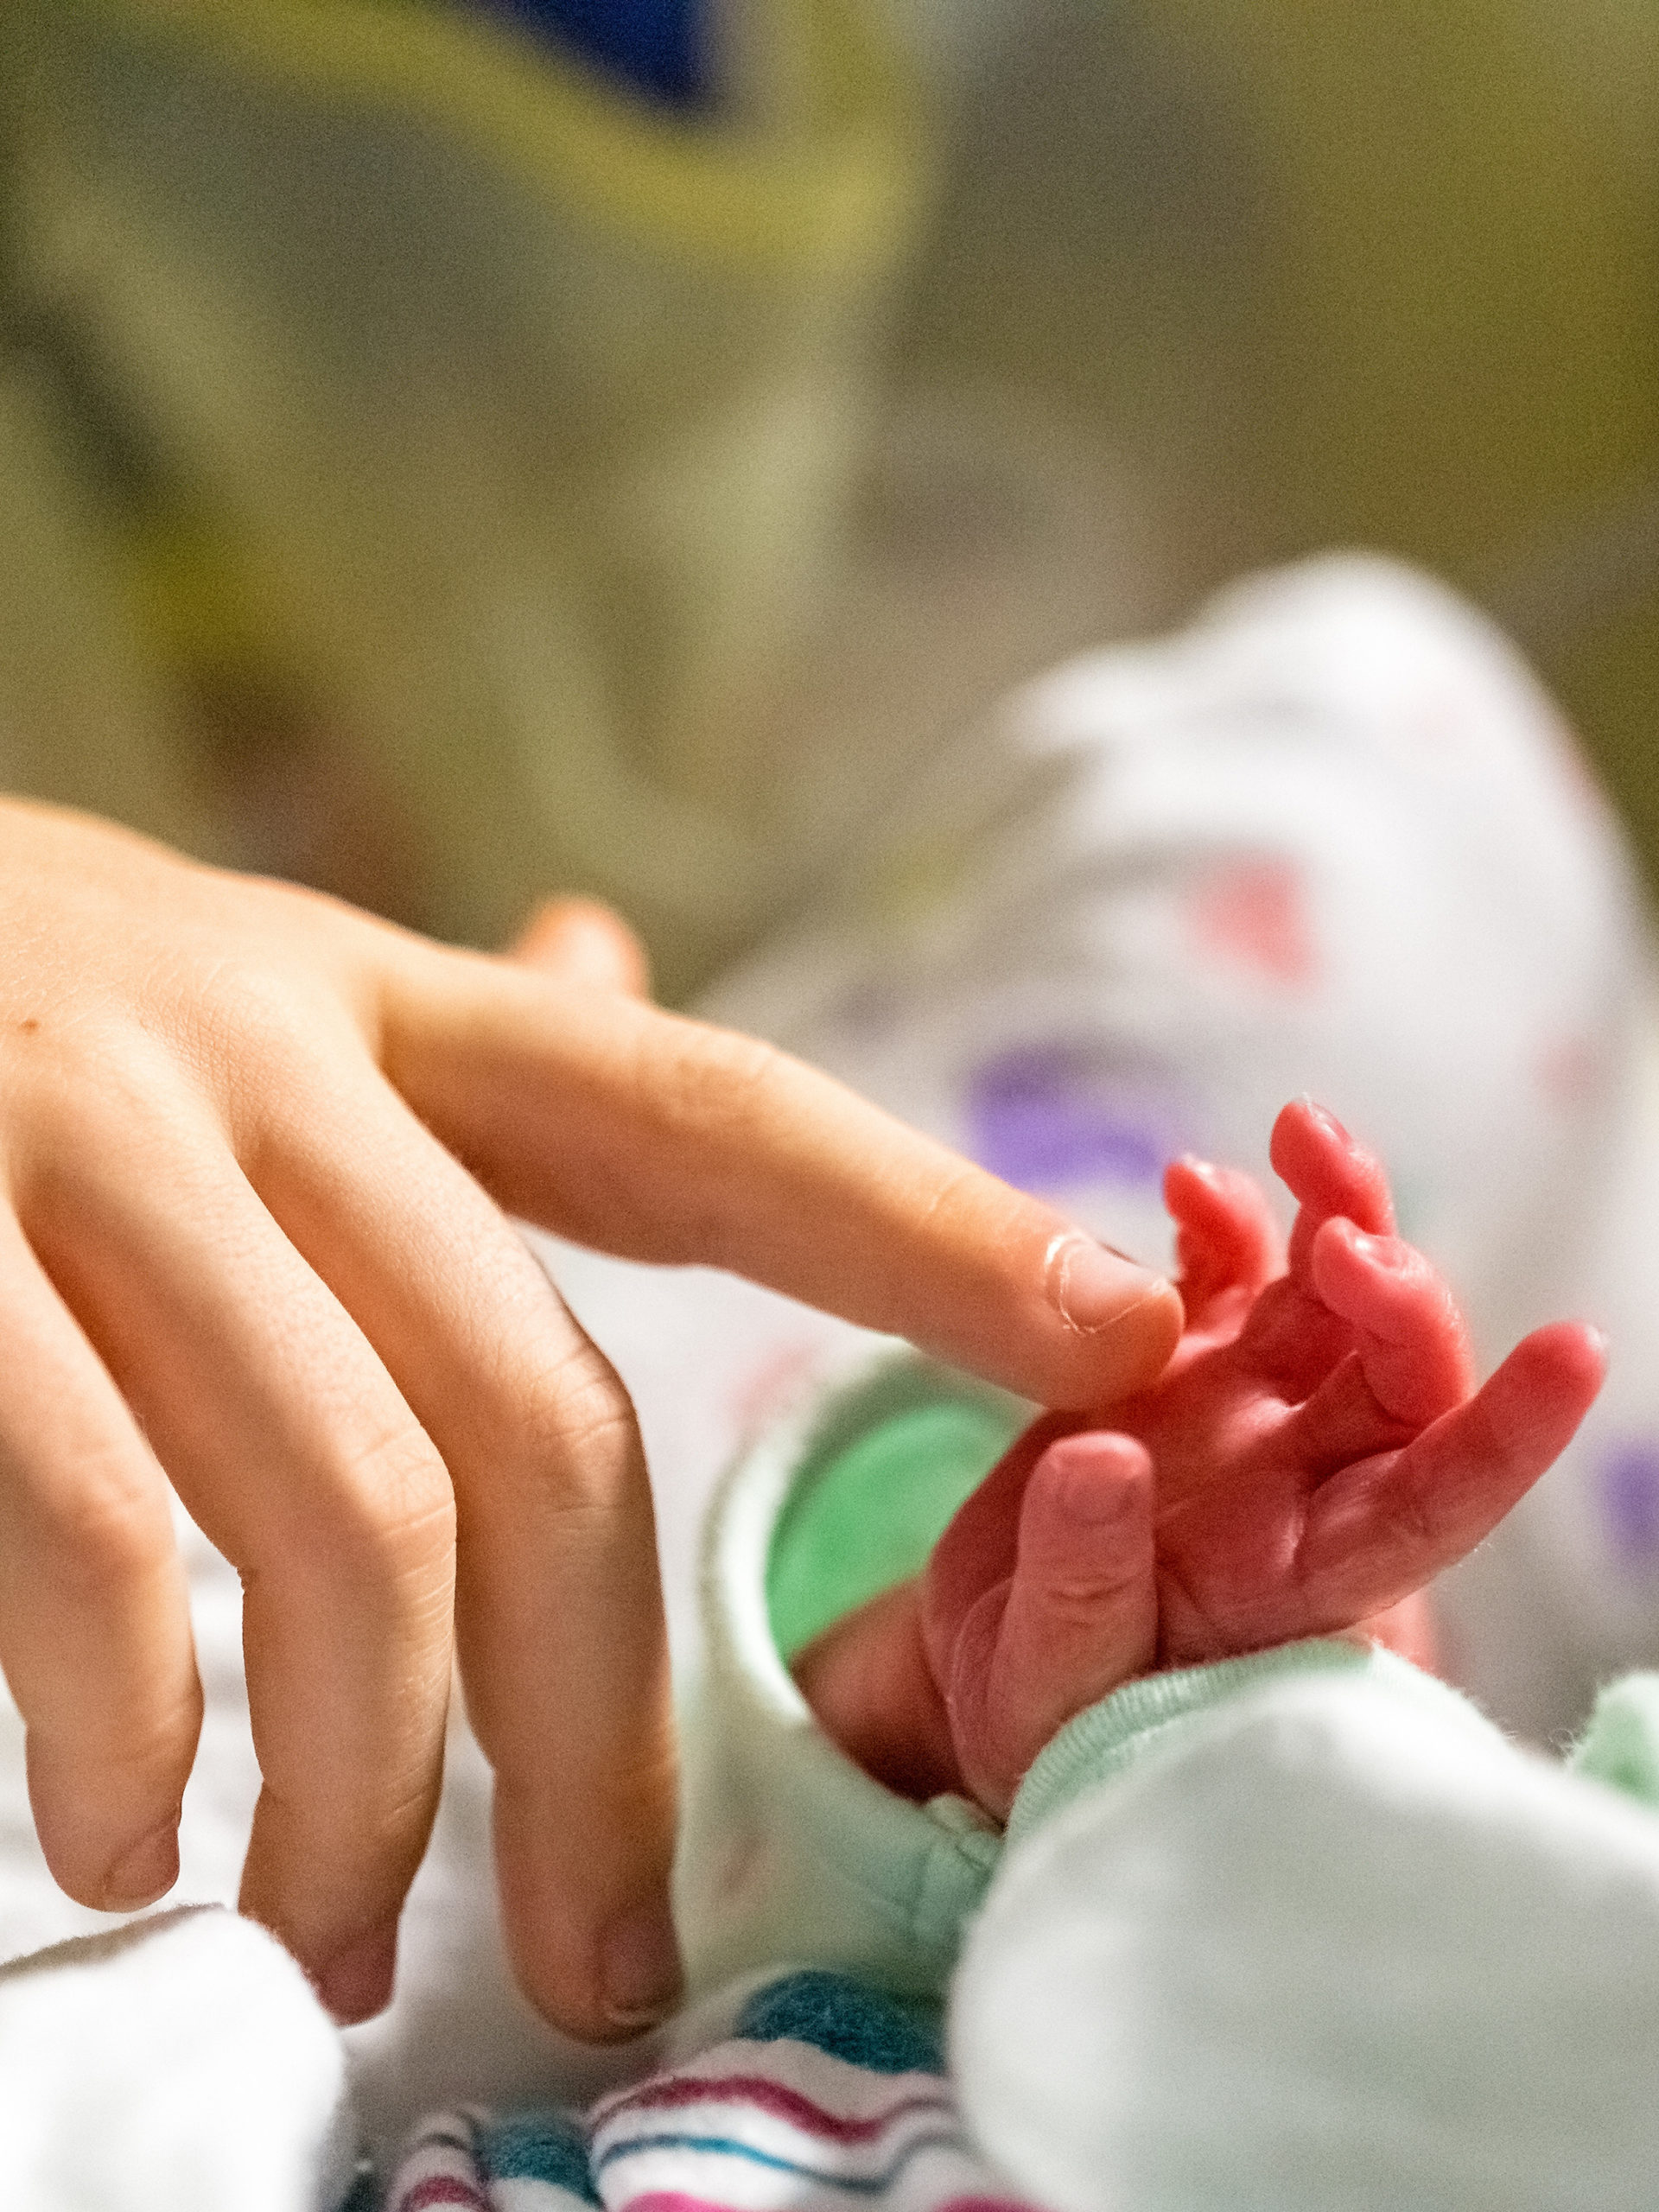 adult touching the hand of infant in the hospital nursery